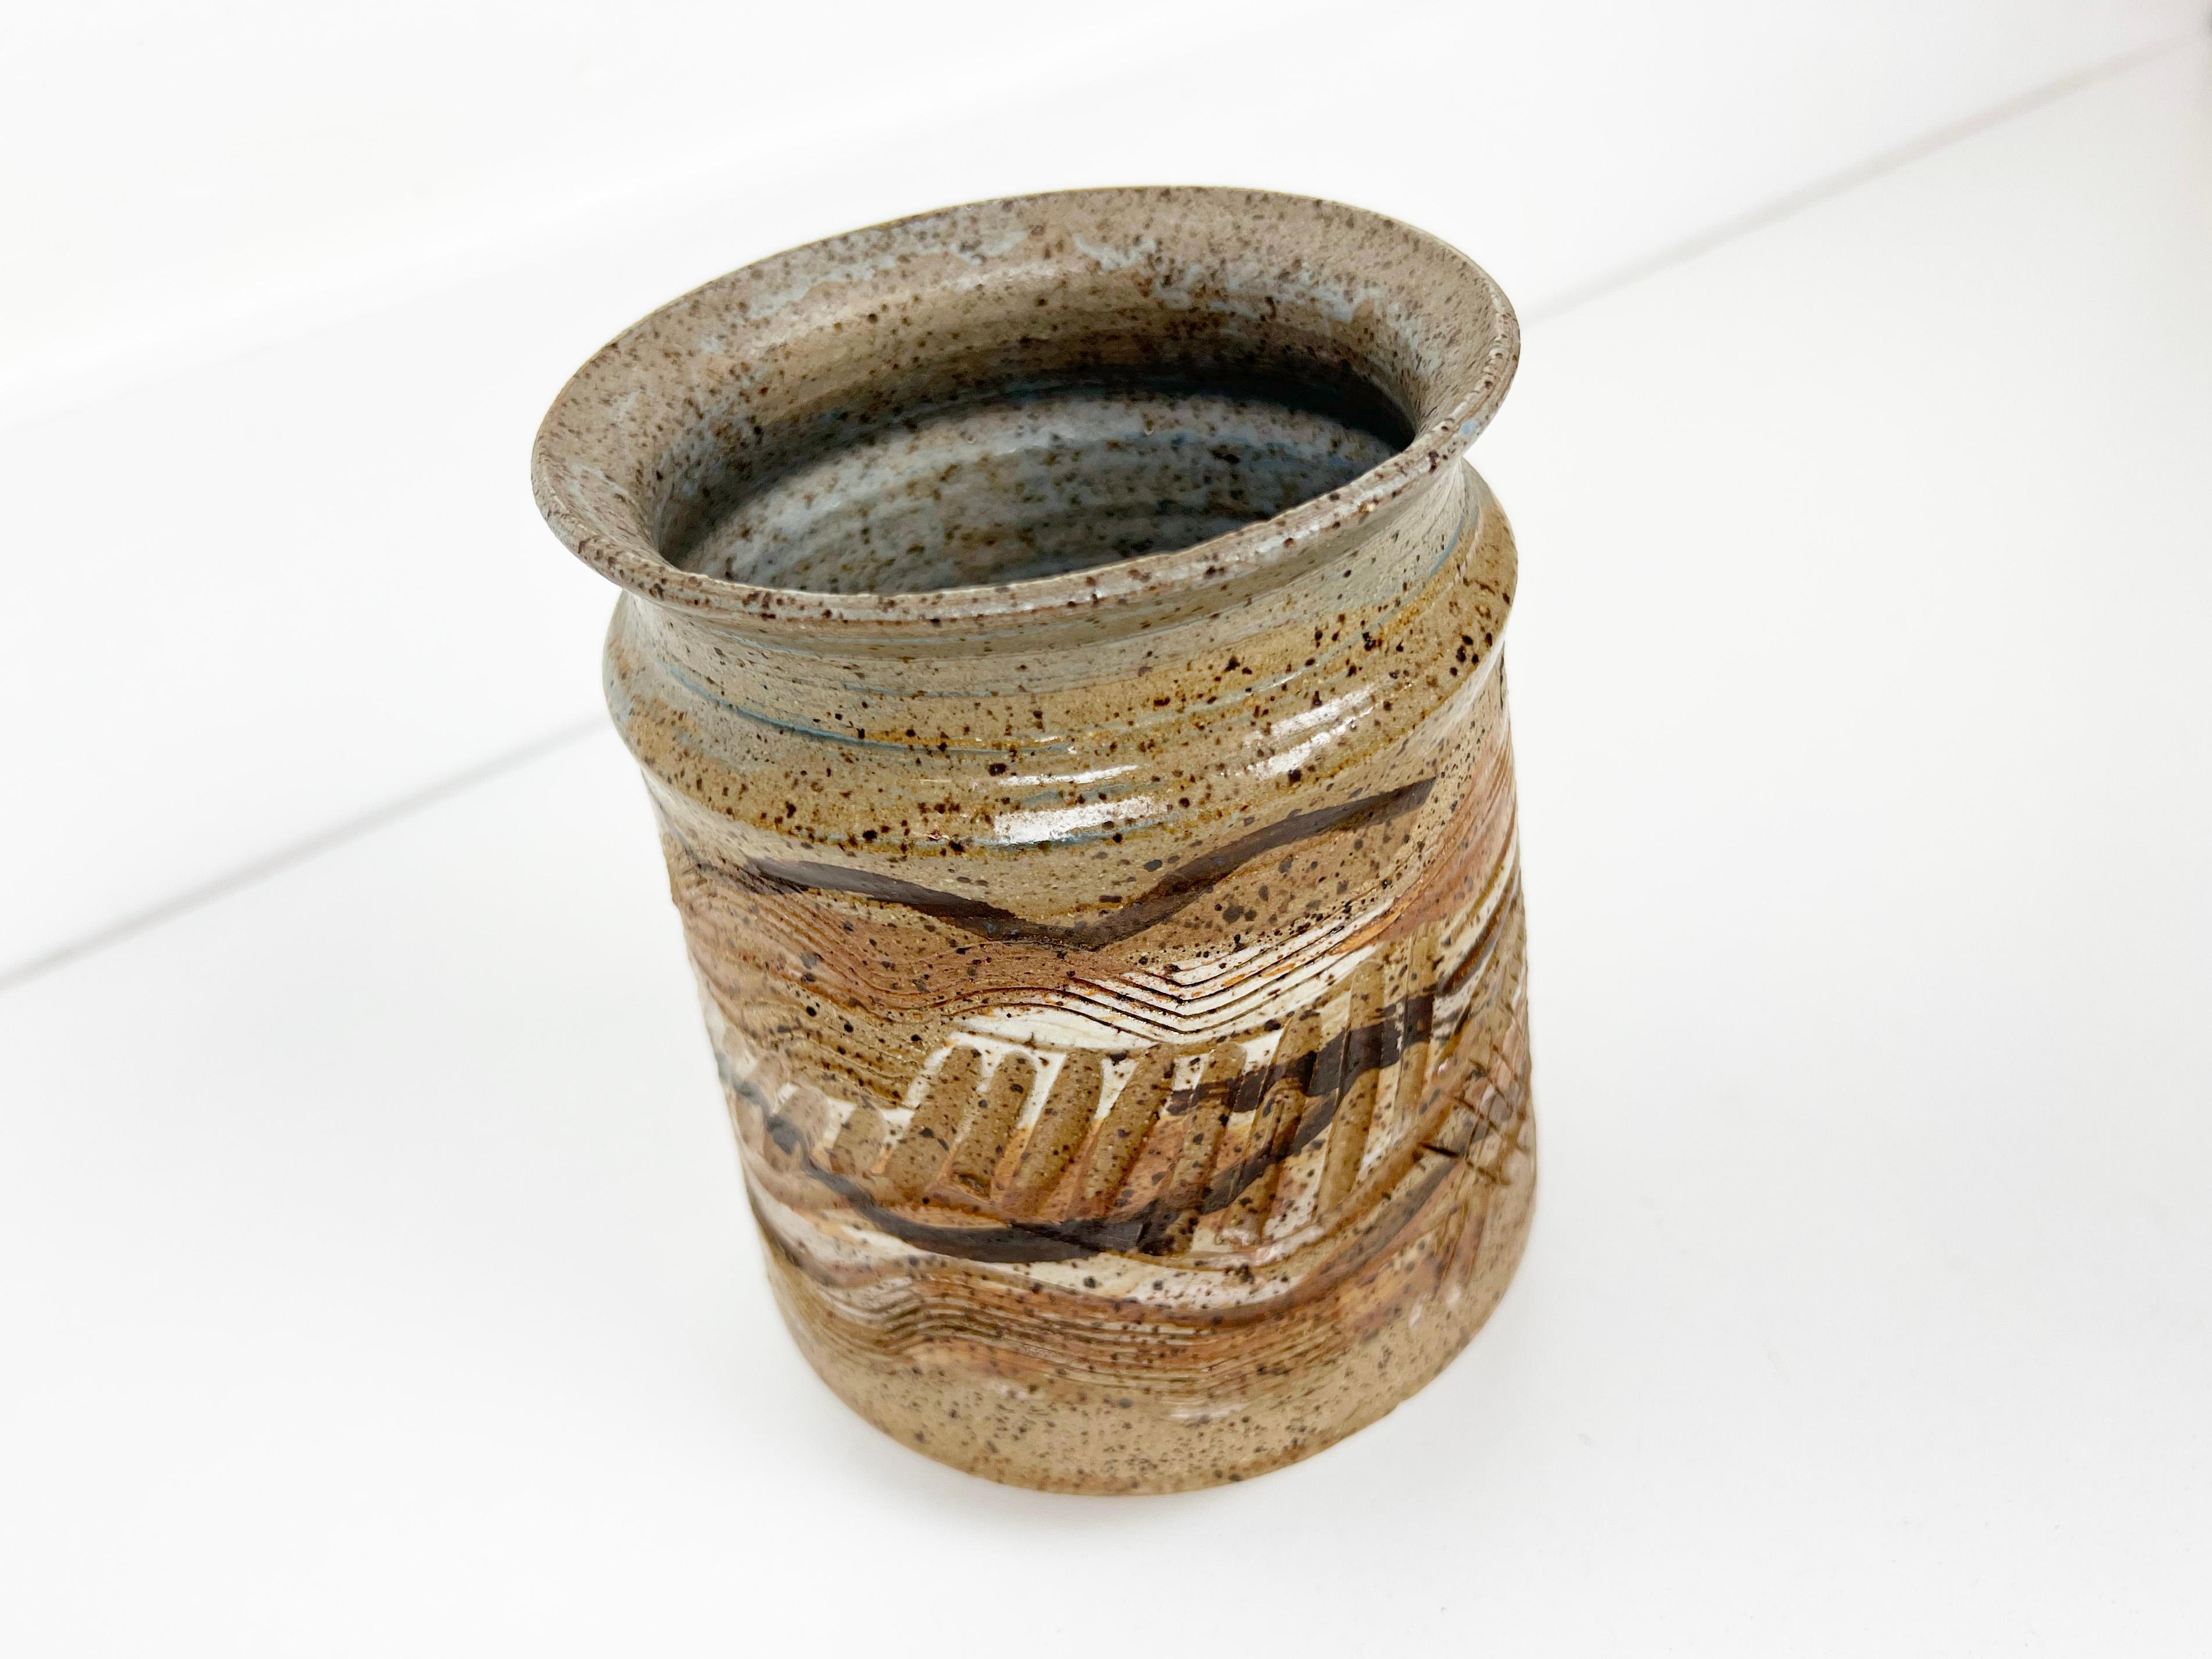 Vintage ceramic vase or planter glazed in browns, whites and orange with a variety of tool markings creating texture and depth. Signed.

Year: 1970s

Style: Mid-Century Modern

Dimensions: 5.5